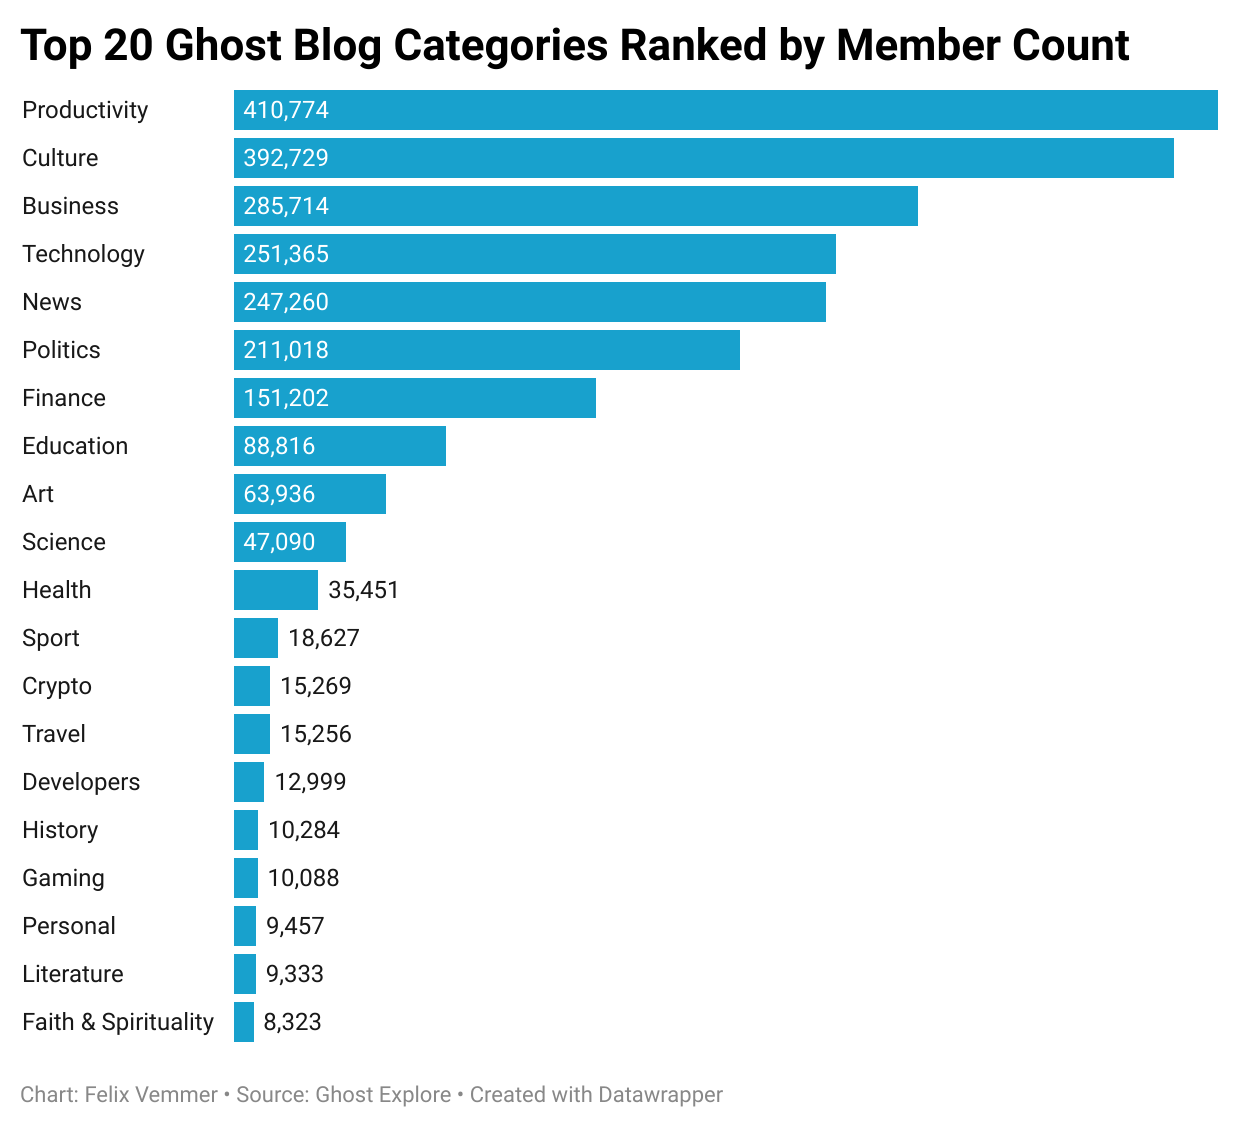 Top 20 Ghost Blog Categories Ranked by Member Count